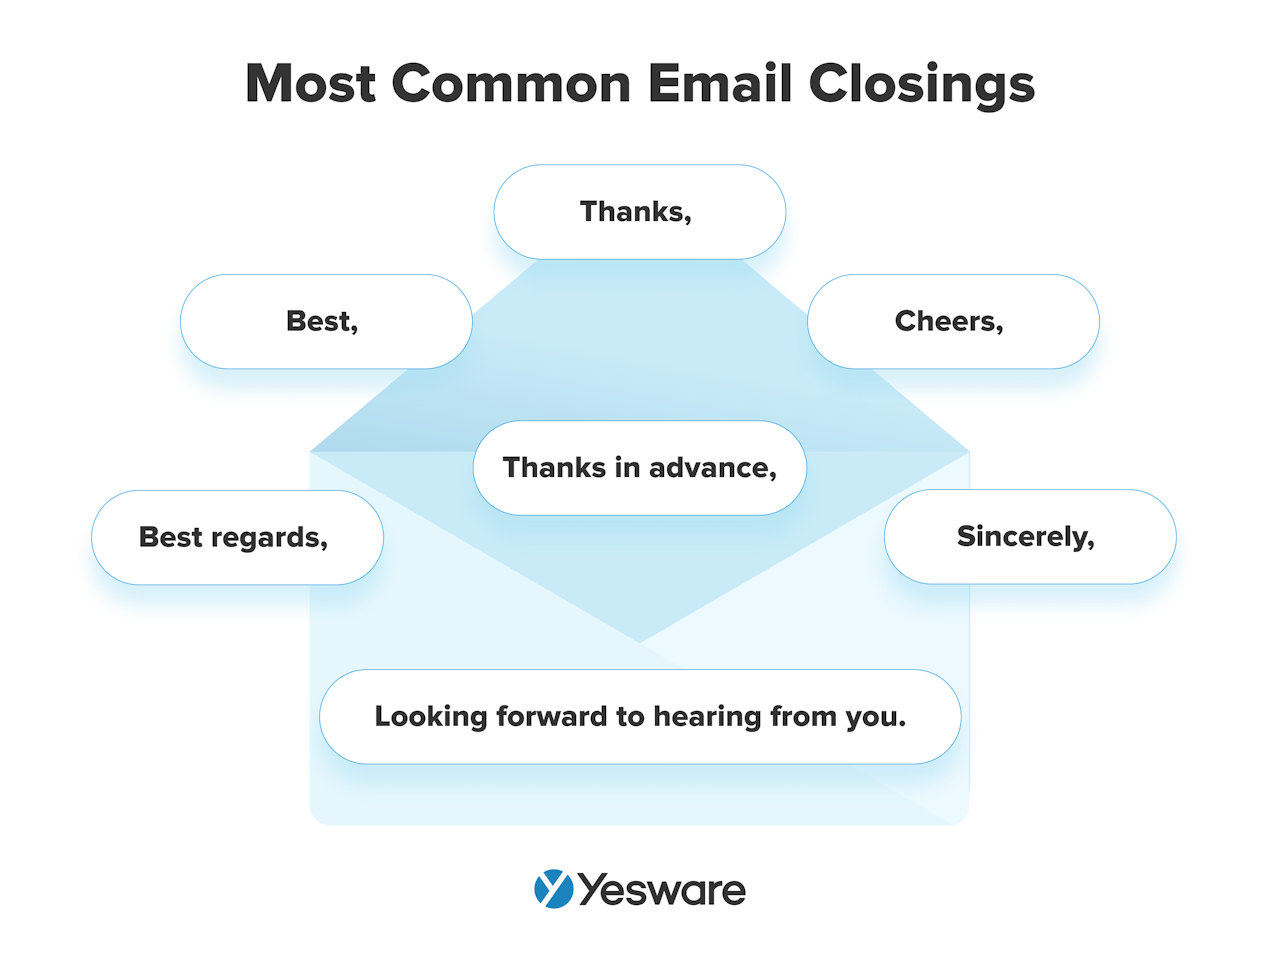 common email closings: looking forward to hearing from you